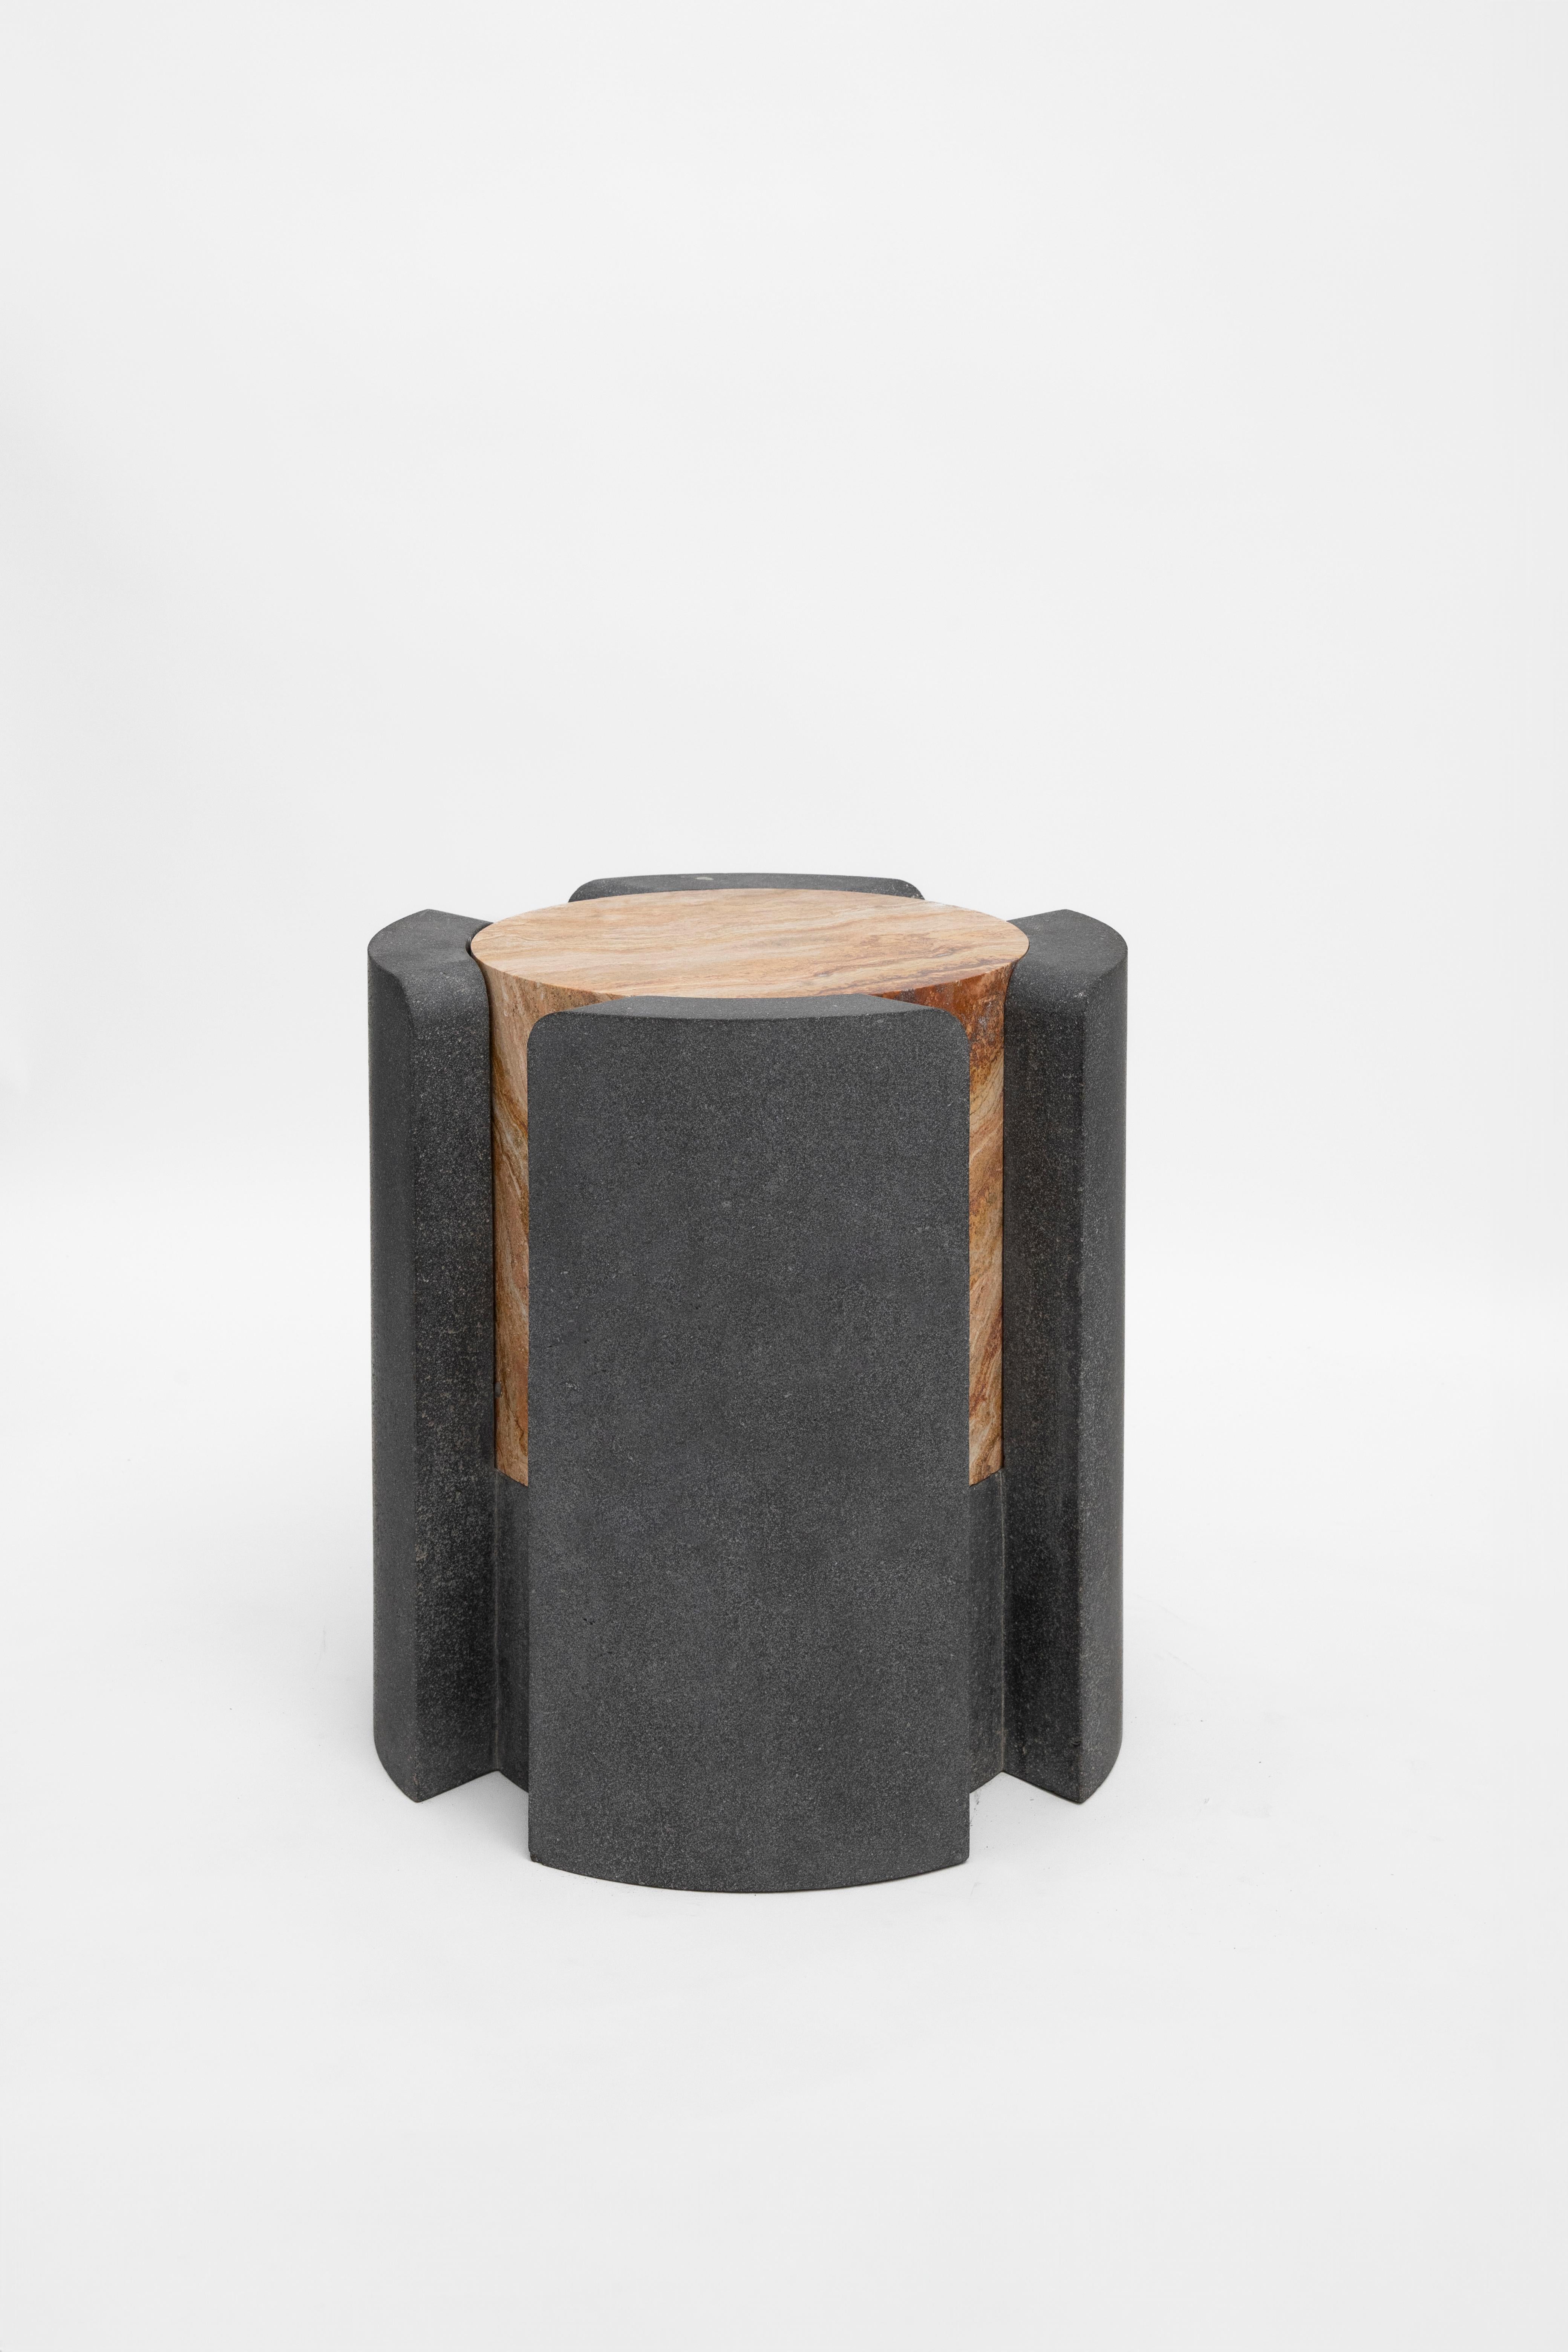 Materials: Lava stone and red travertine
Indoors and outdoors
Side table / Stool

Through an abstract geometric language where cubes and cylinders playfully alternate, these stools represent the millenary connections existing inside the Earth; they